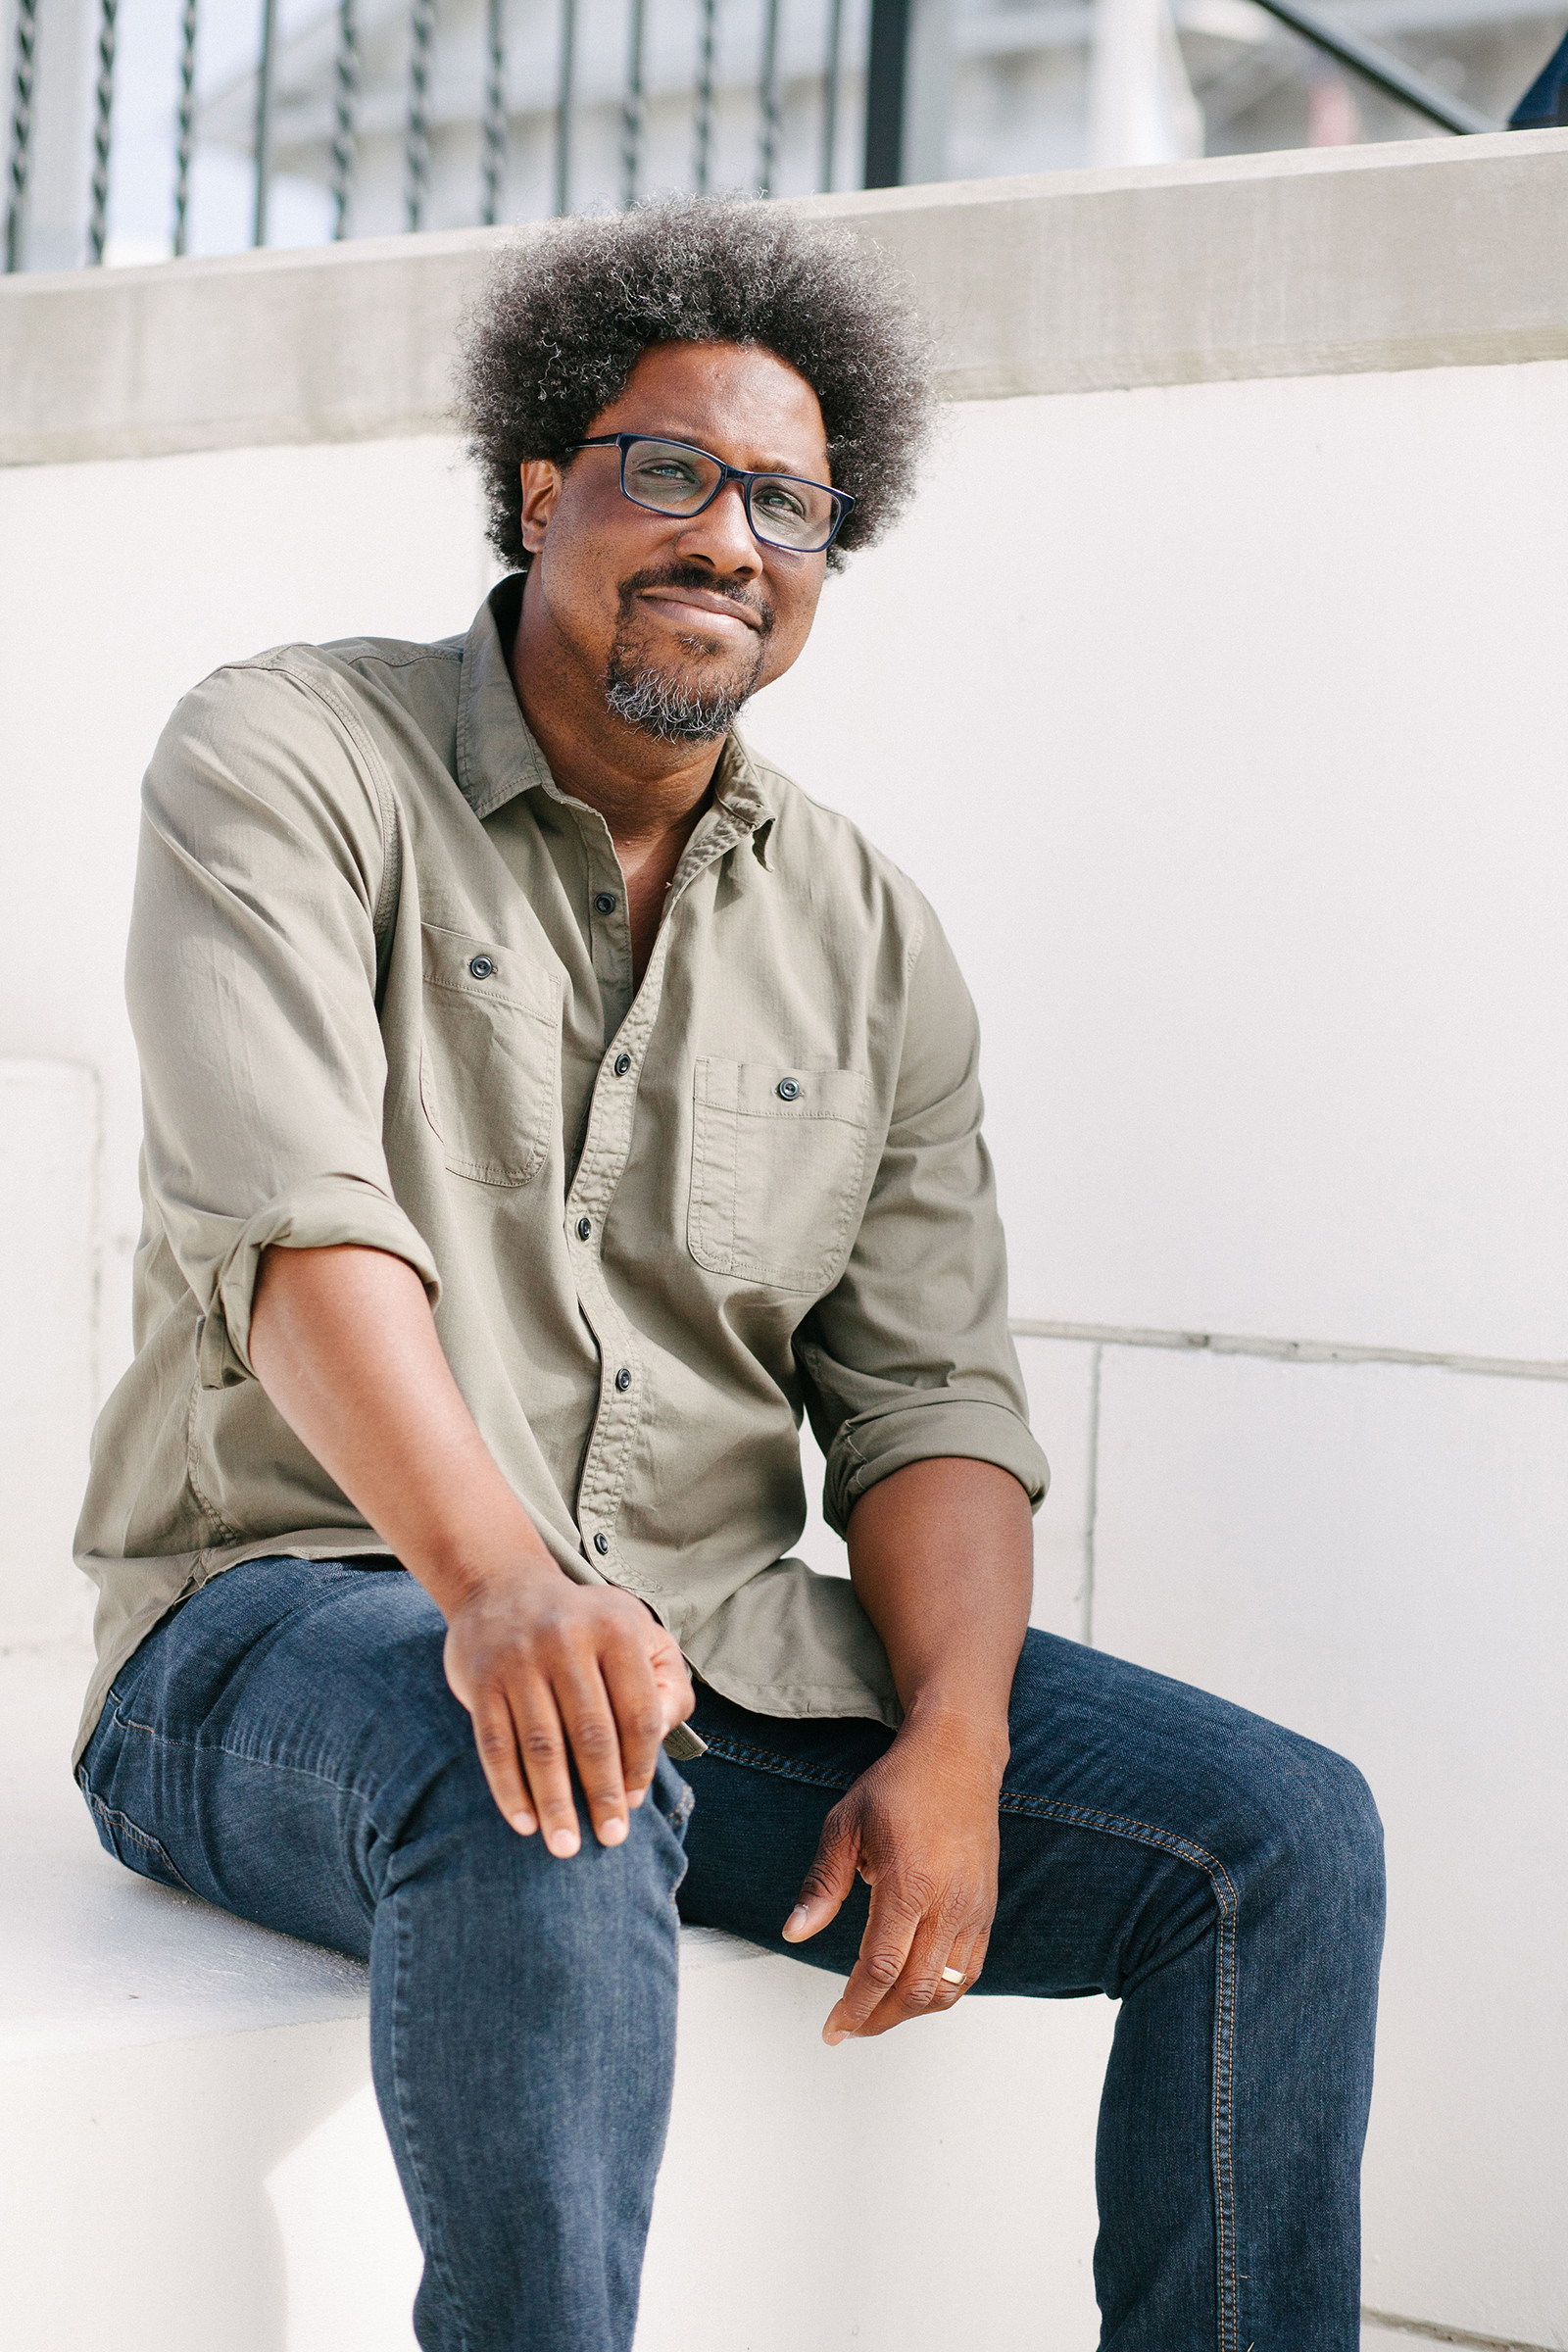 W. Kamau Bell’s docuseries <i>We Need To Talk About Cosby</i> aims to examine the career and descent of Bill Cosby. (Aundre Larrow)